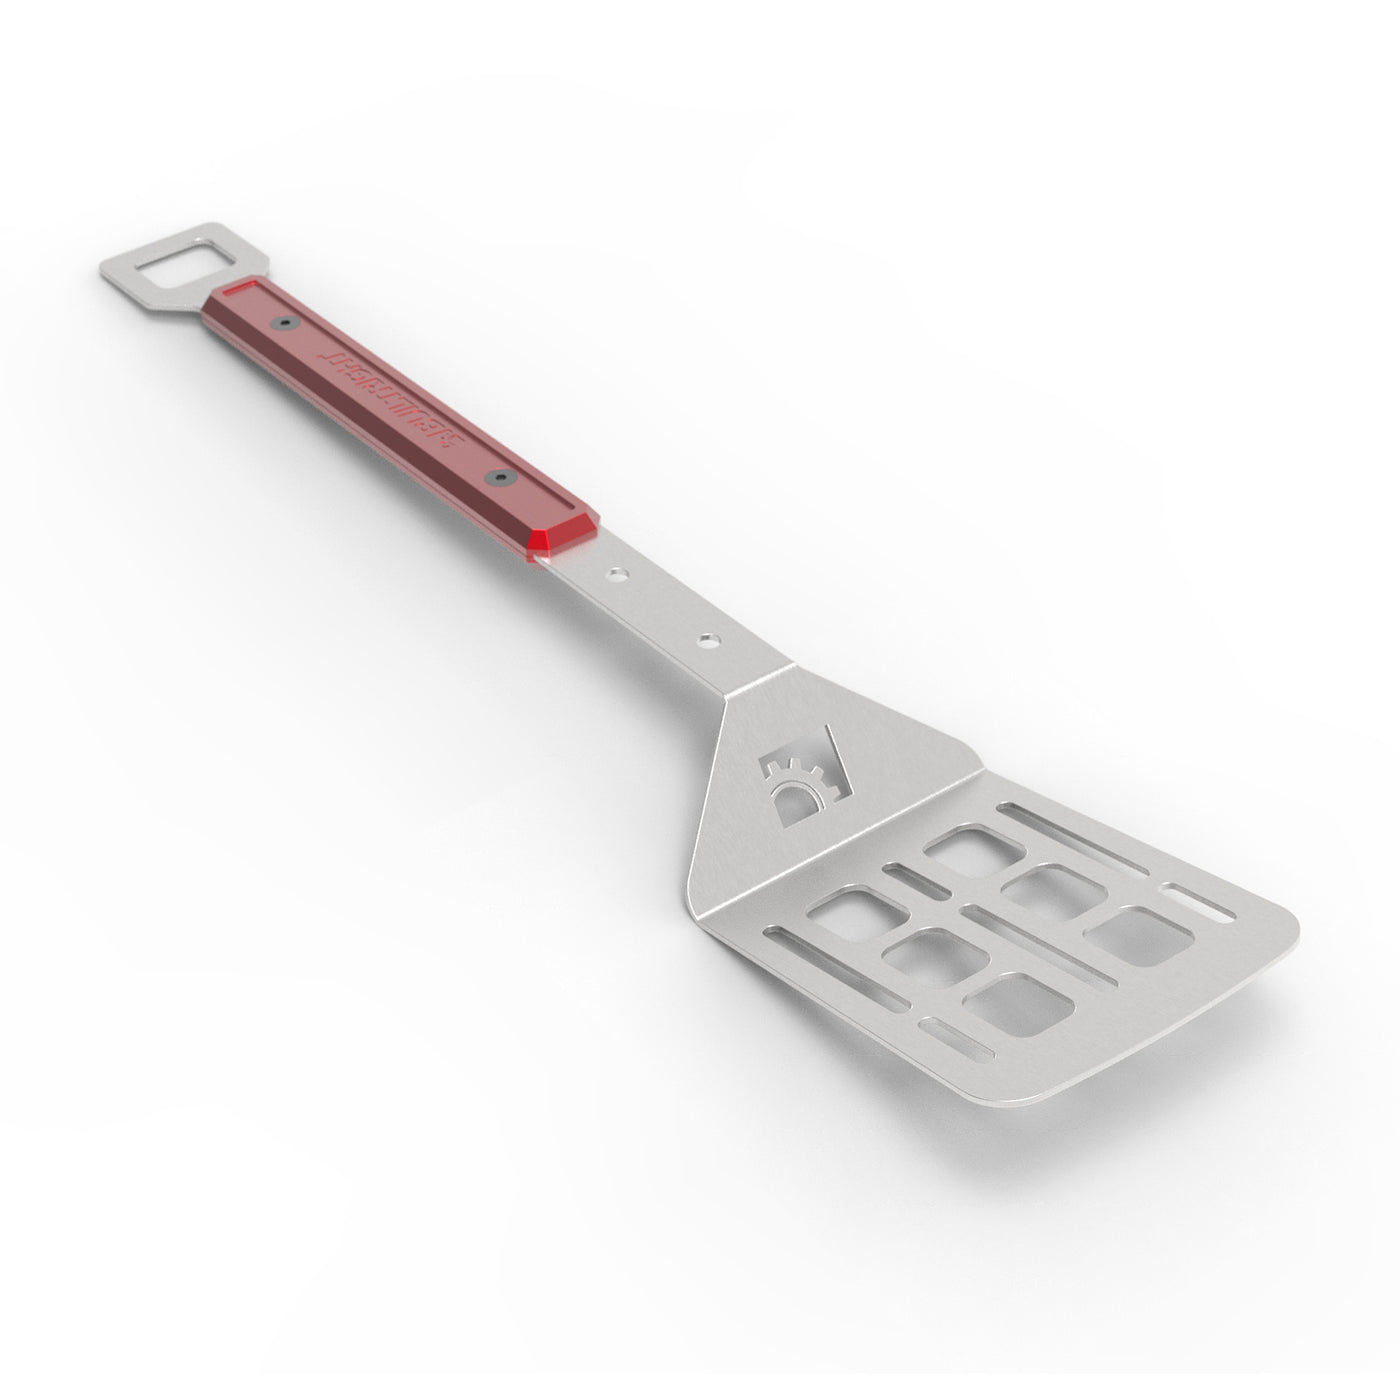 BuiltRight Utility Spatula (PRO and Standard)